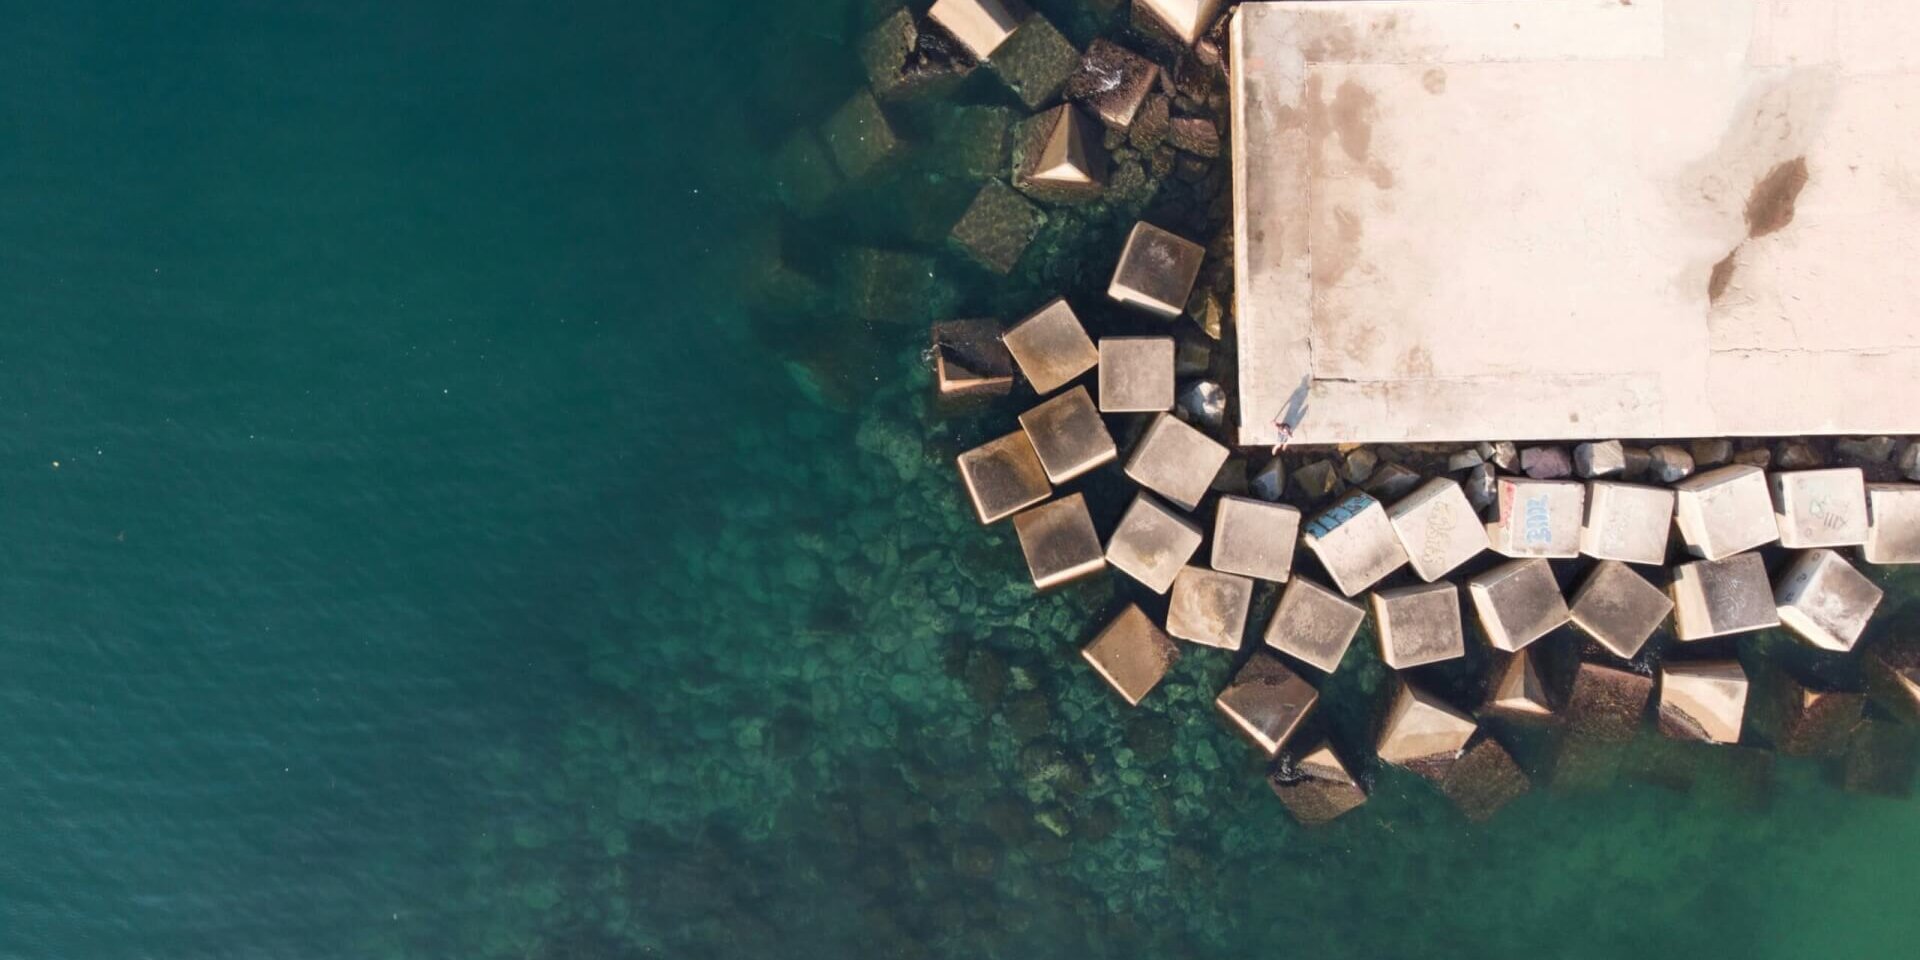 A top view of a dock surrounded by water